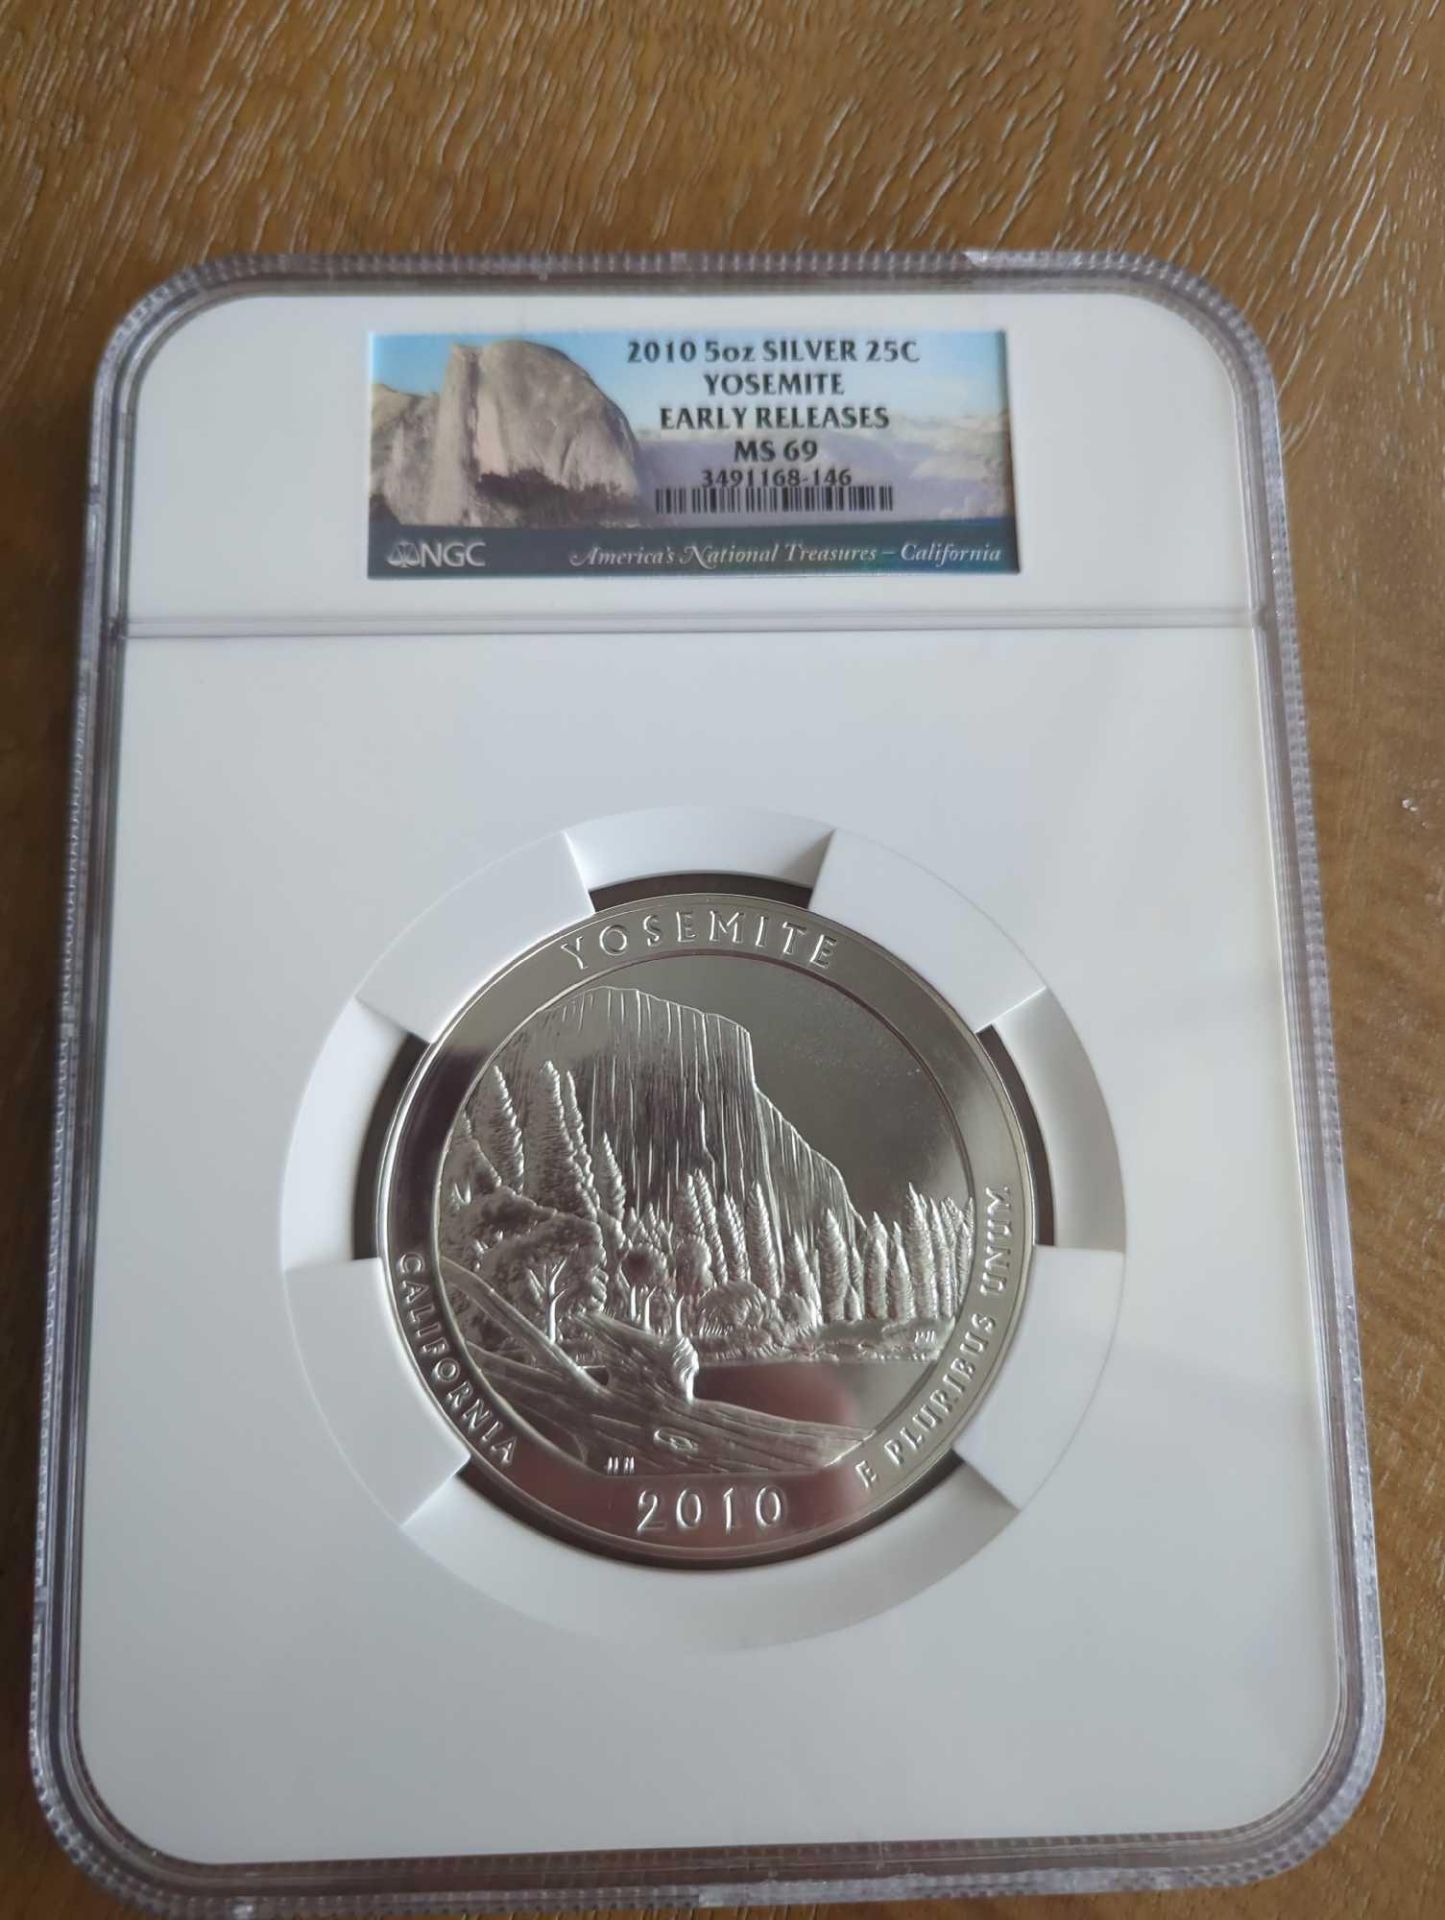 2010 5 oz Silver Yosemite Early Release ms69 - Image 2 of 4